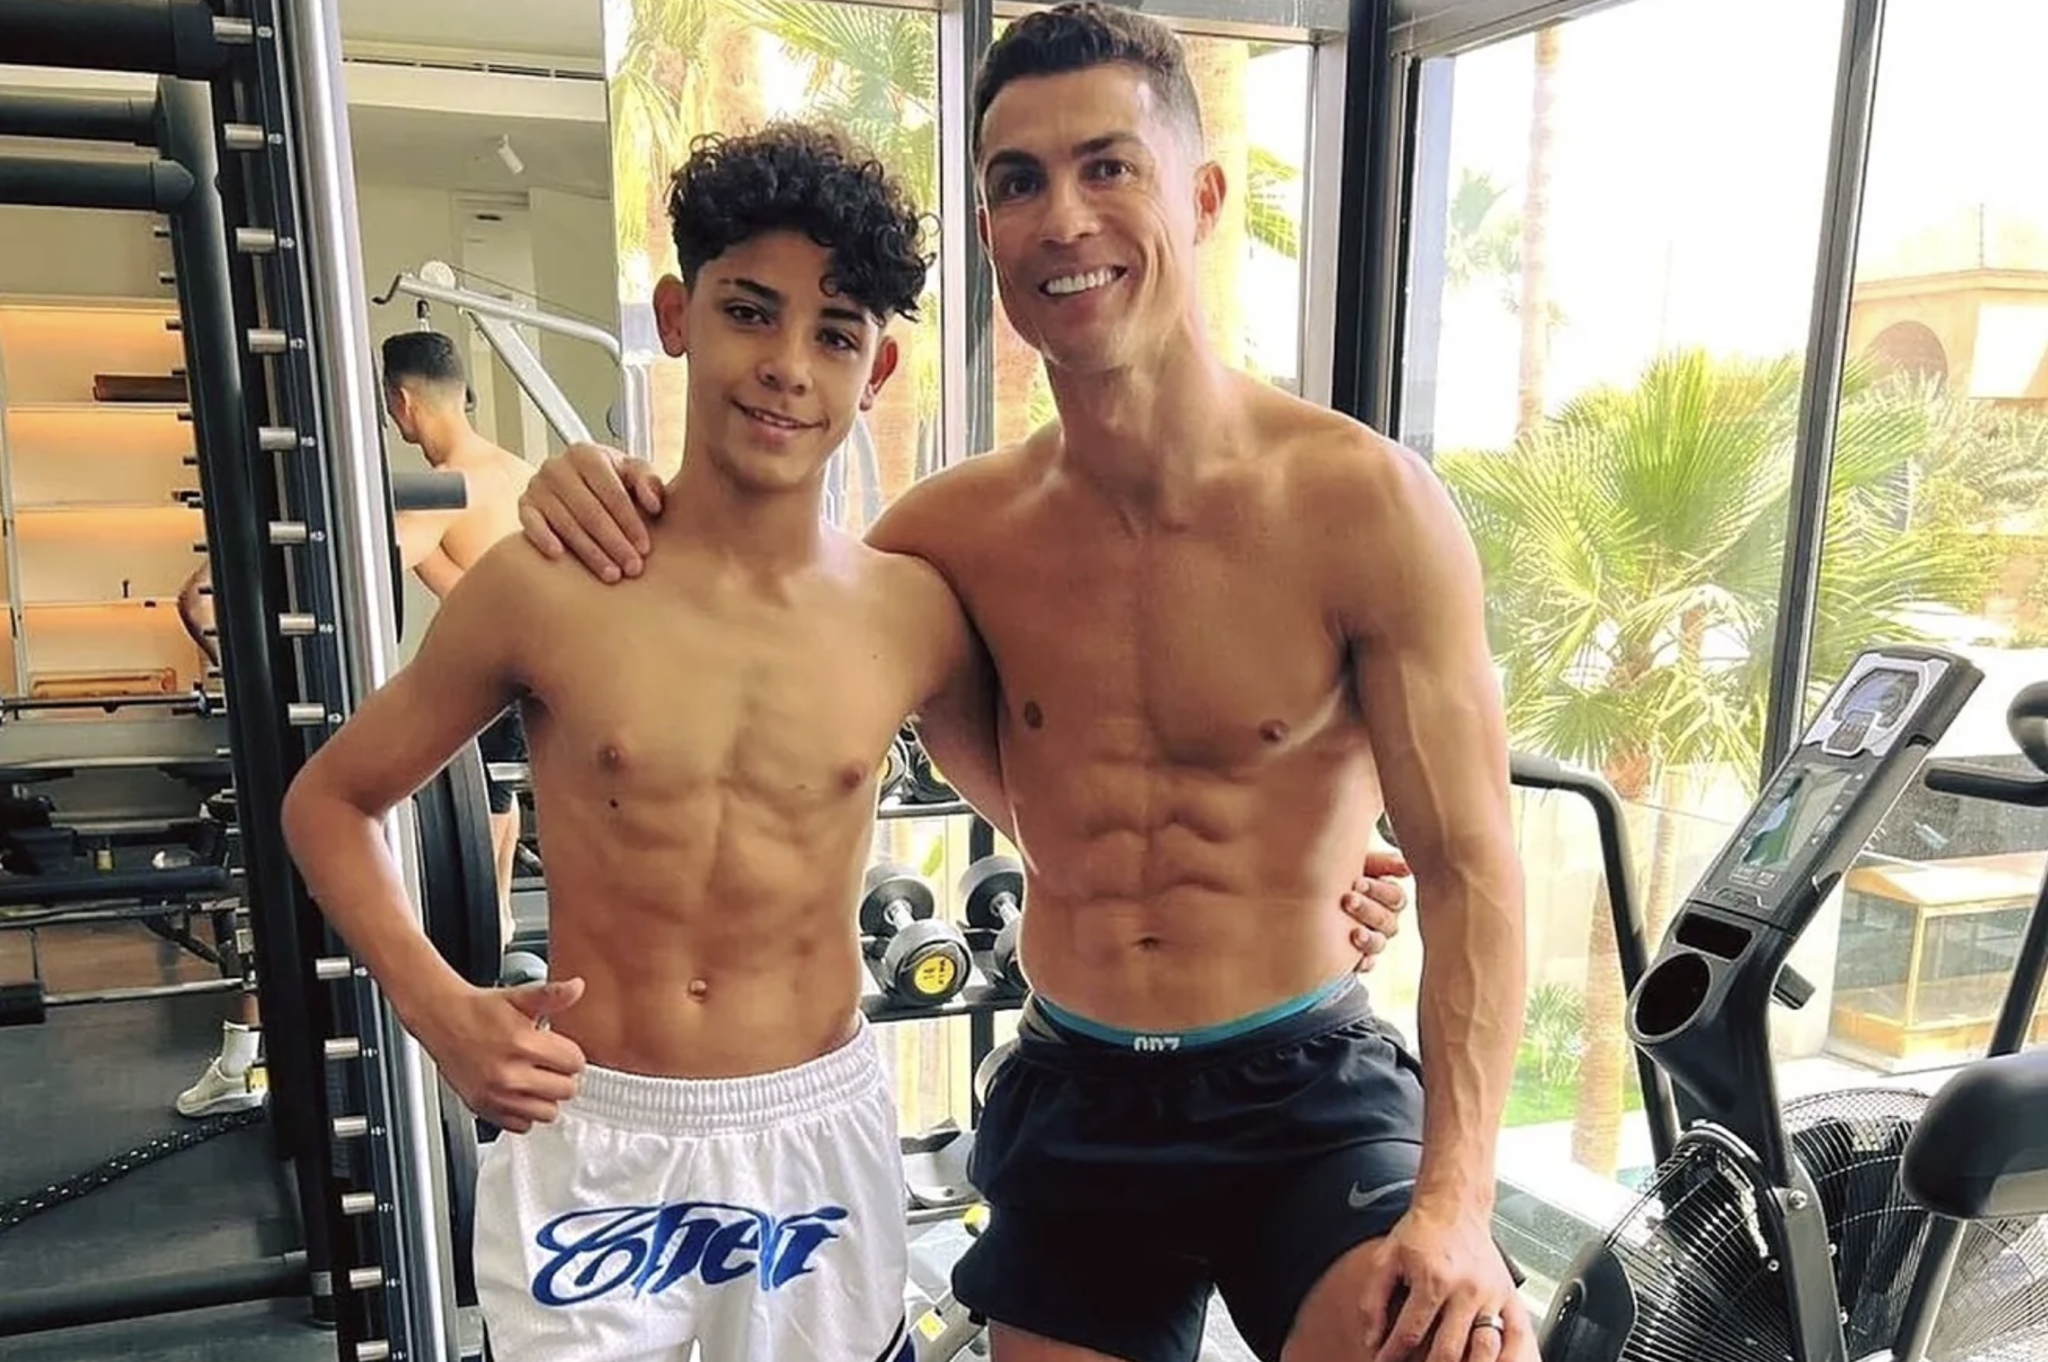 Cristiano Ronaldo and his son show off some serious abs in the gym